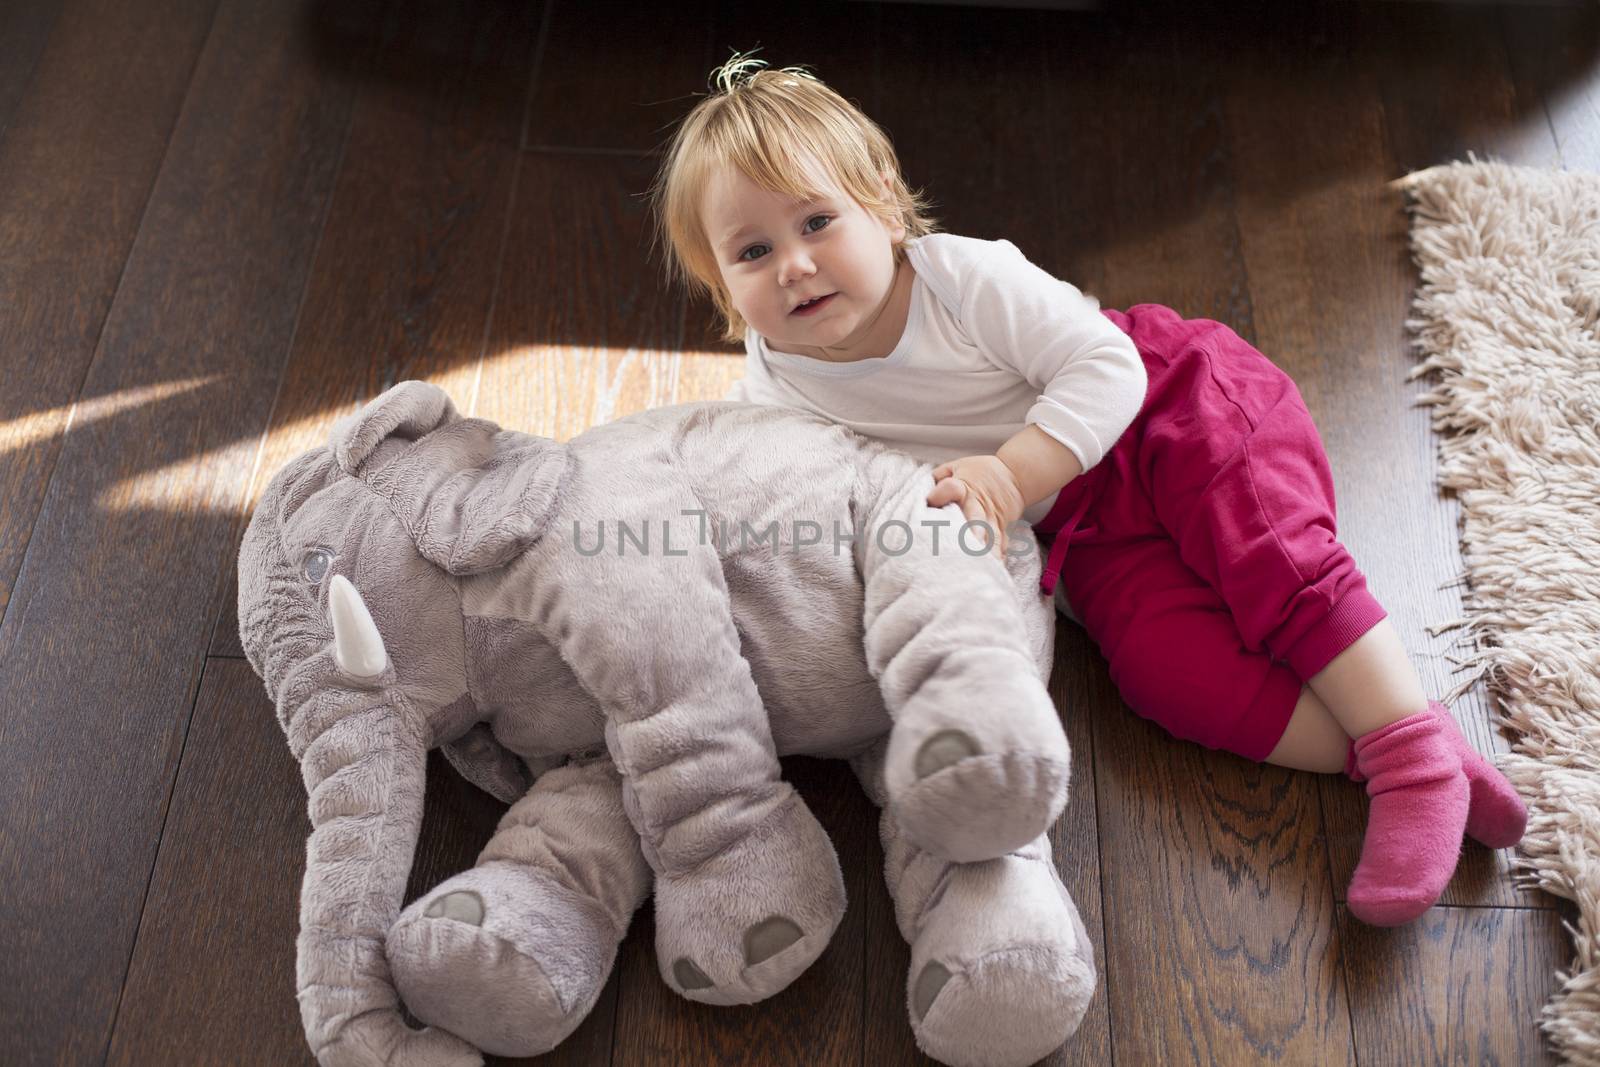 baby lying with elephant plush doll by quintanilla